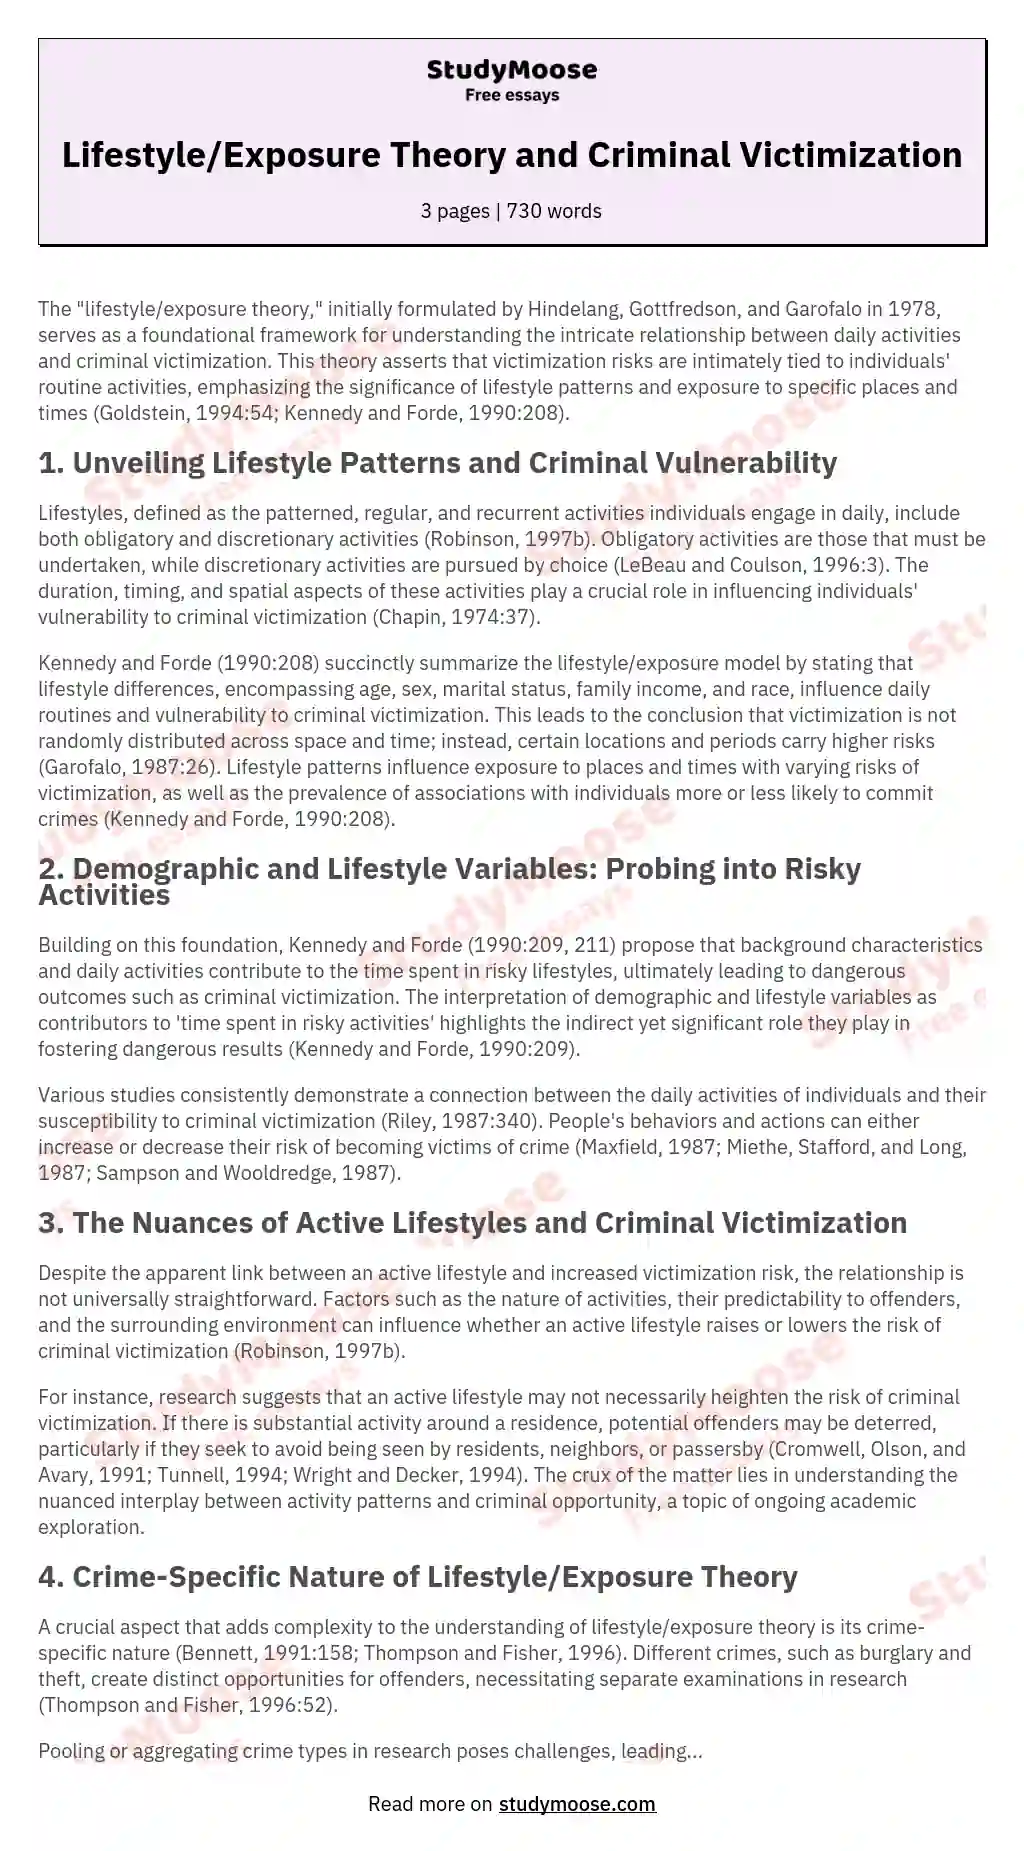 Lifestyle/Exposure Theory and Criminal Victimization essay